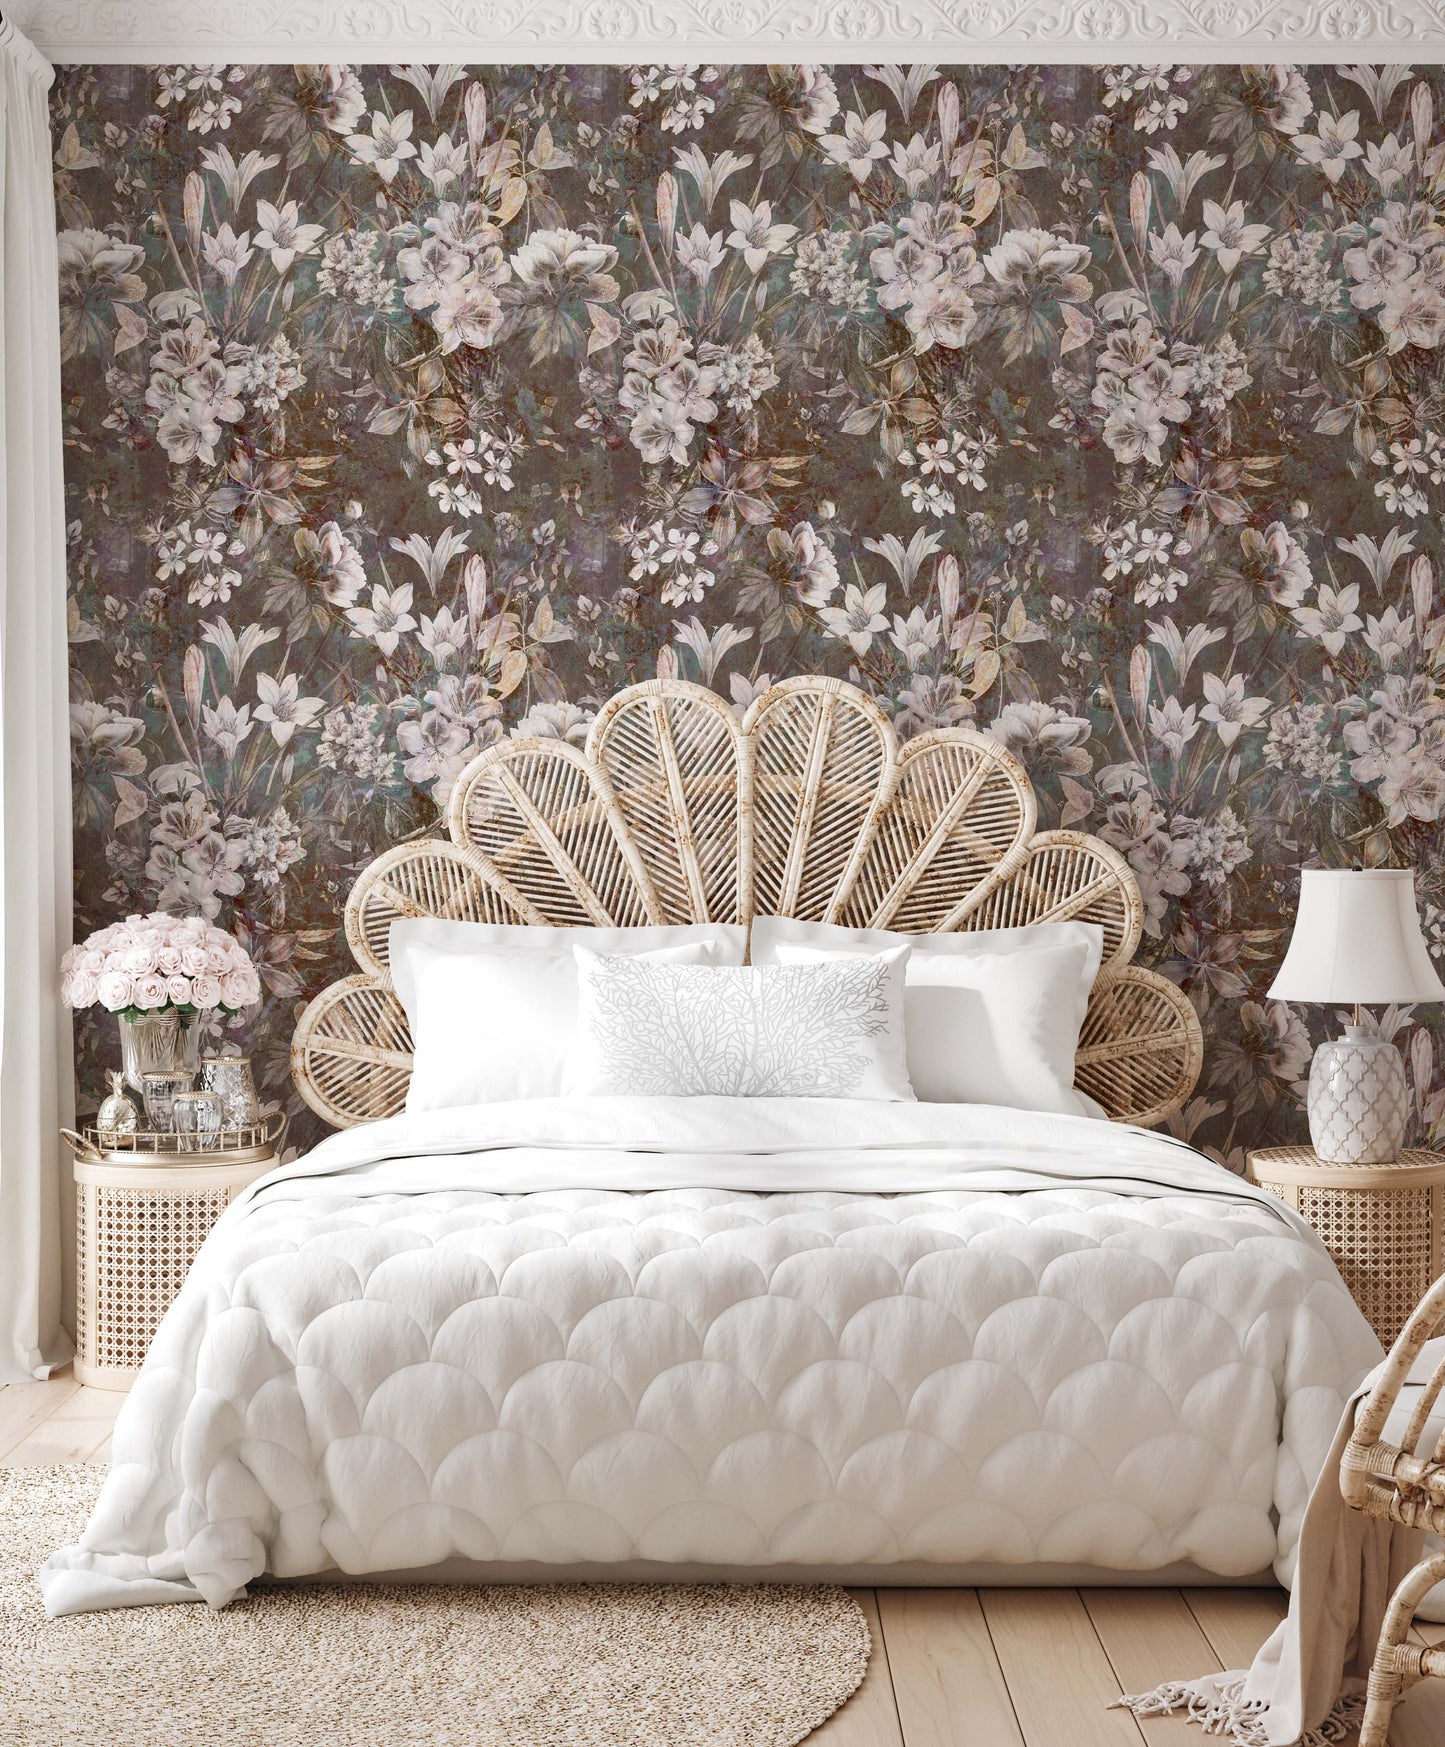 True Vintage Floral | Clay Coated | Wallpaper